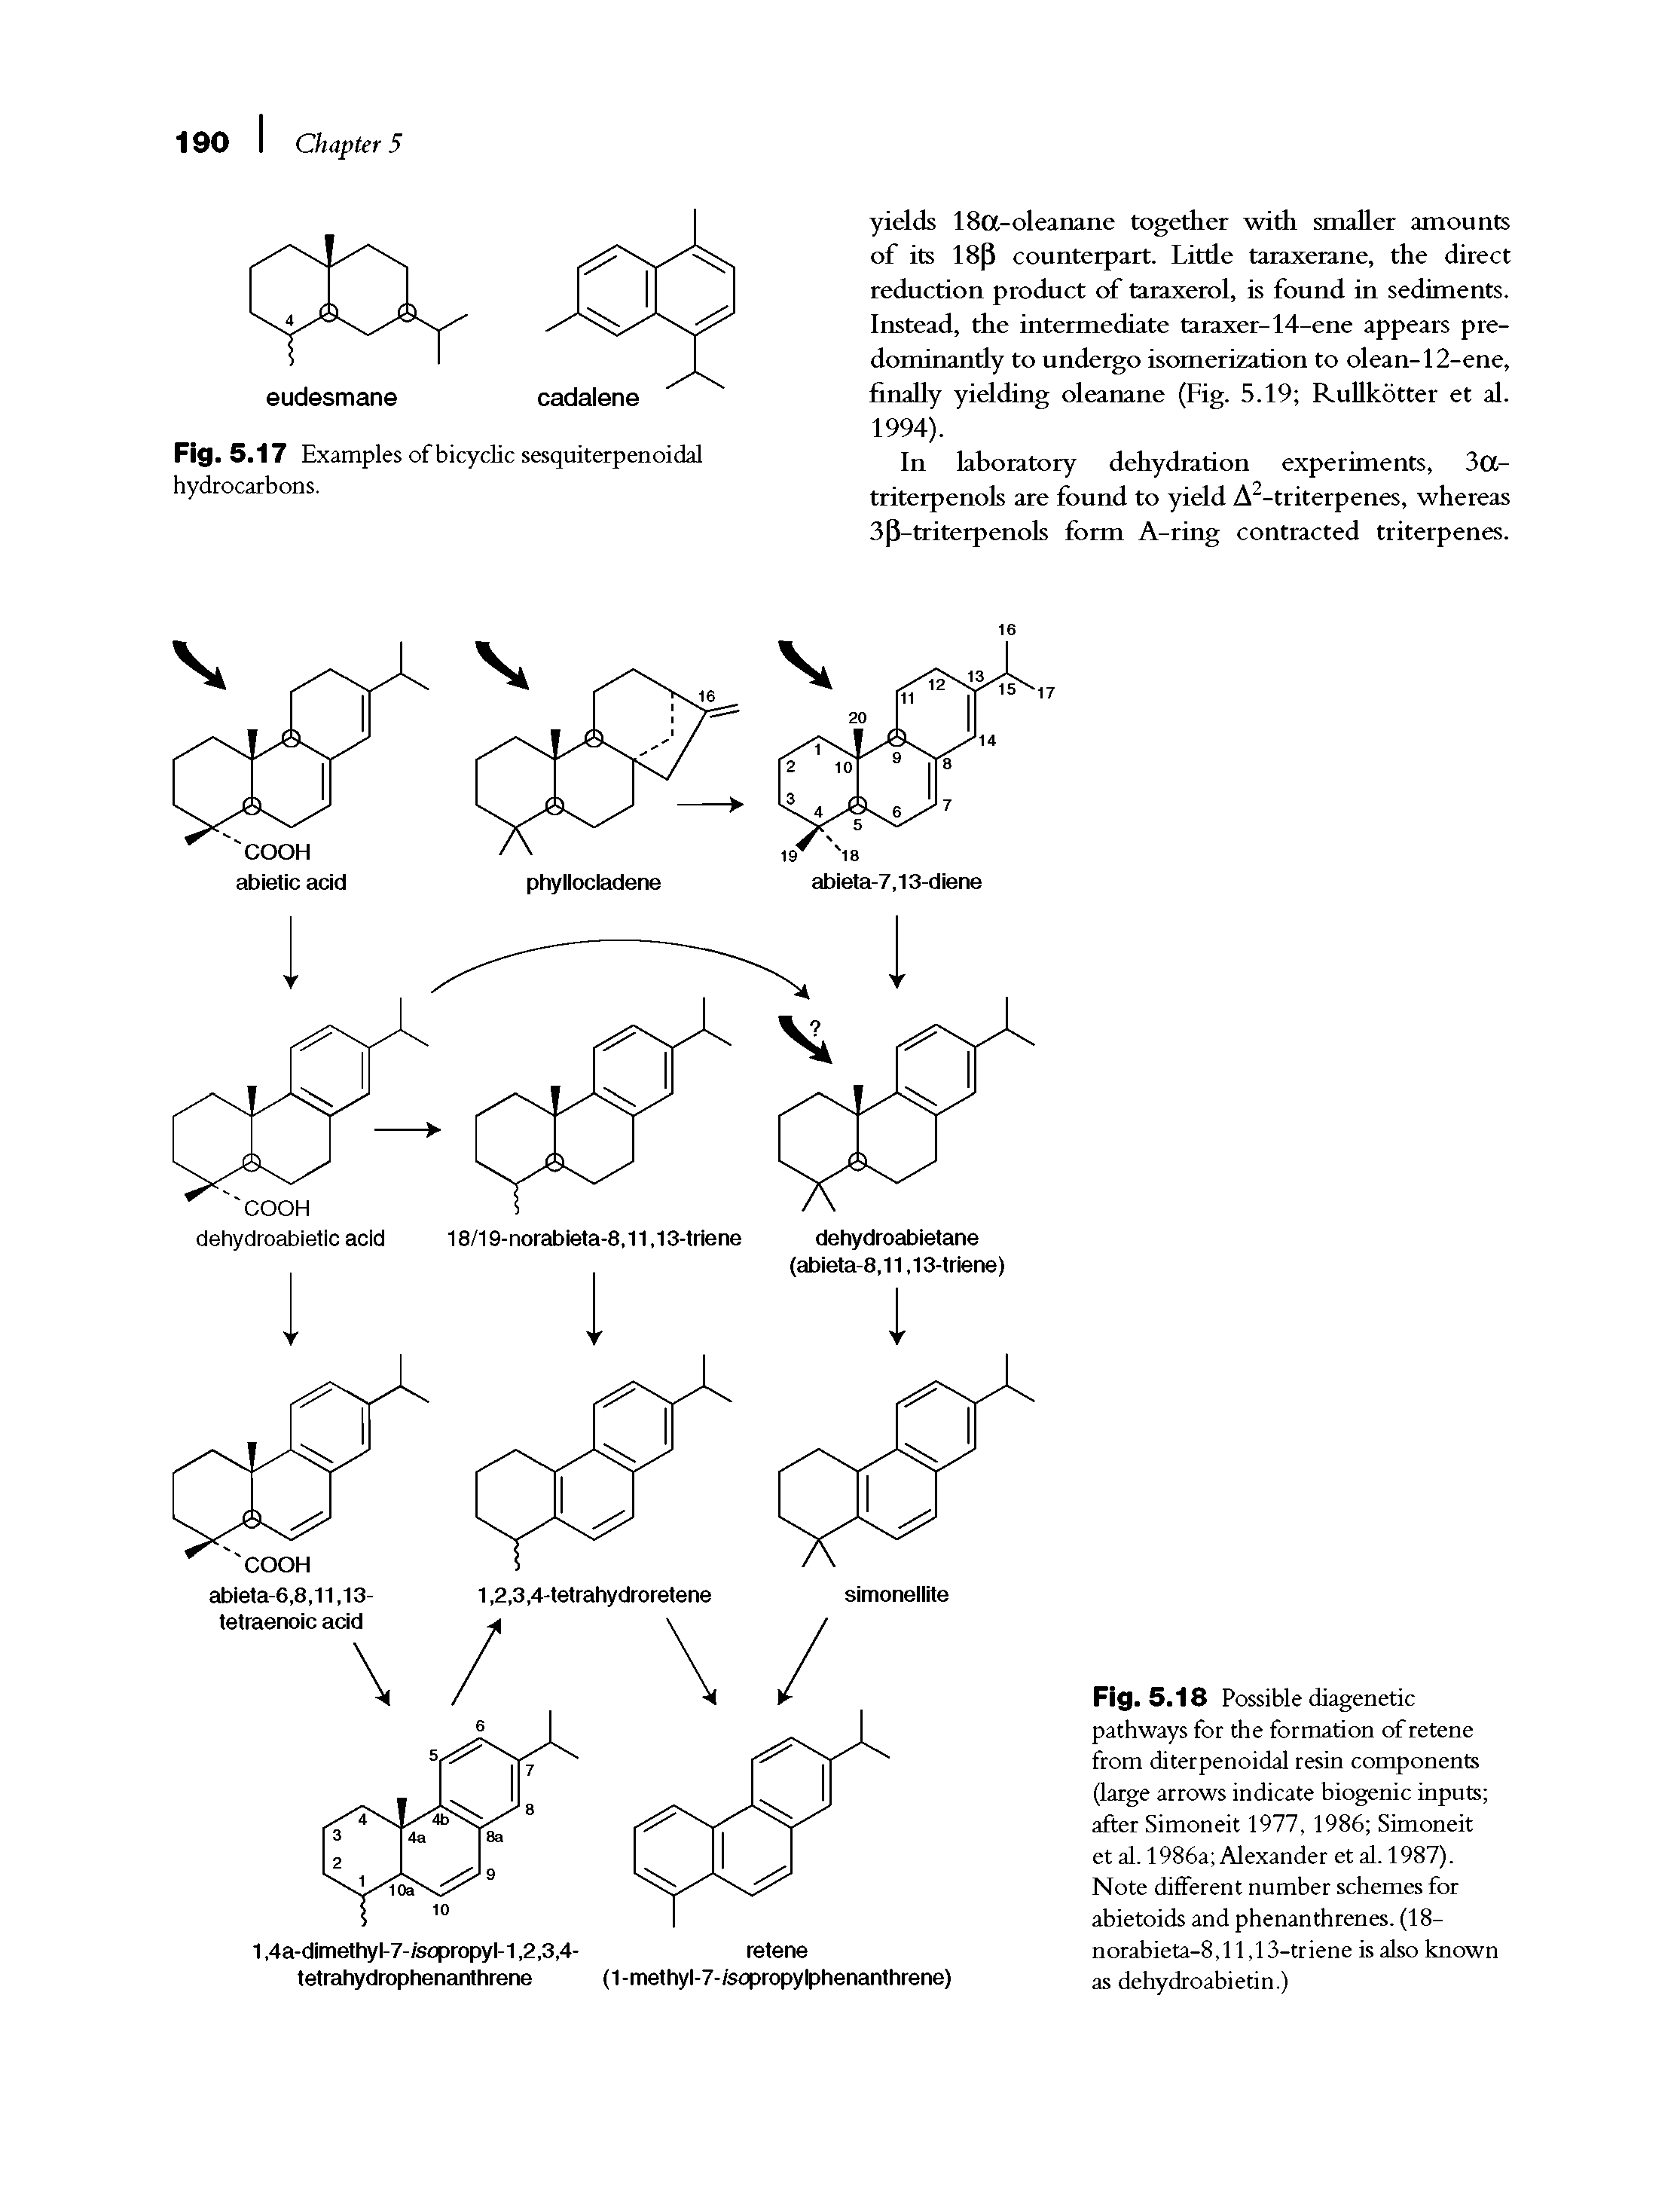 Fig. 5.18 Possible diagenetic pathways for the formation ofretene from diterpenoidal resin components (large arrows indicate biogenic inputs after Simoneit 1977, 1986 Simoneit et al. 1986a Alexander et al. 1987). Note different number schemes for abietoids and phenanthrenes. (18-norabieta-8,ll,13-triene is also known as dehydroabietin.)...